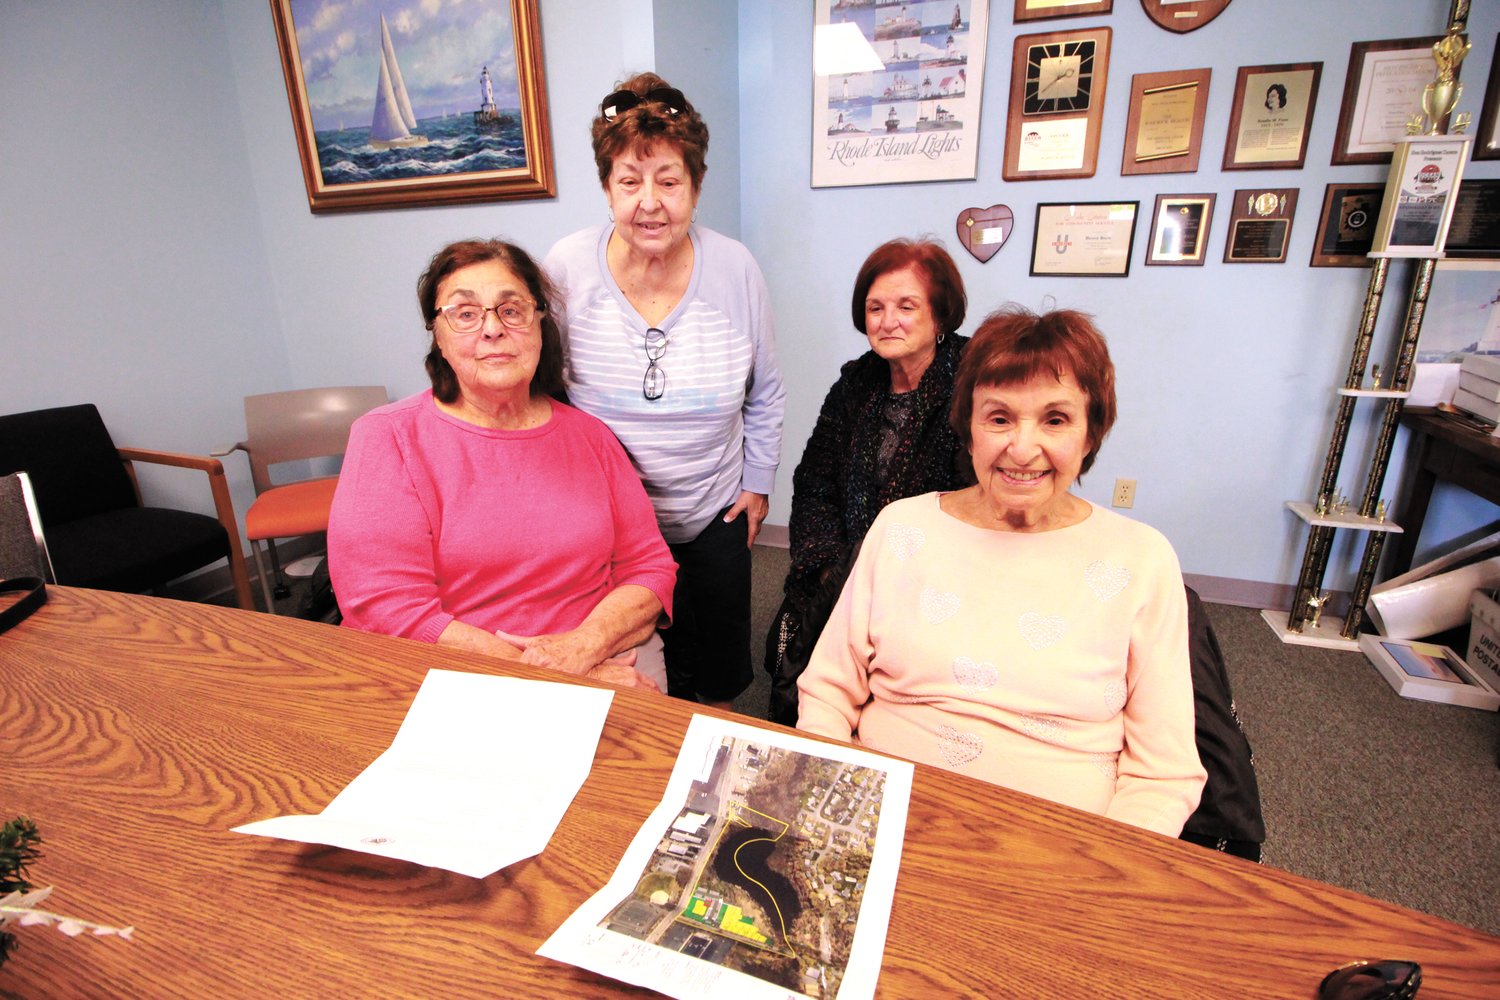 THEY DON’T WANT IT: Wethersfield Commons residents Kathy Dougal, Beatrice MacArthur, Joan Riley and Delores DelSesto are concerned over how the proposed development would impact the condominium complex. (Warwick Beacon photo)